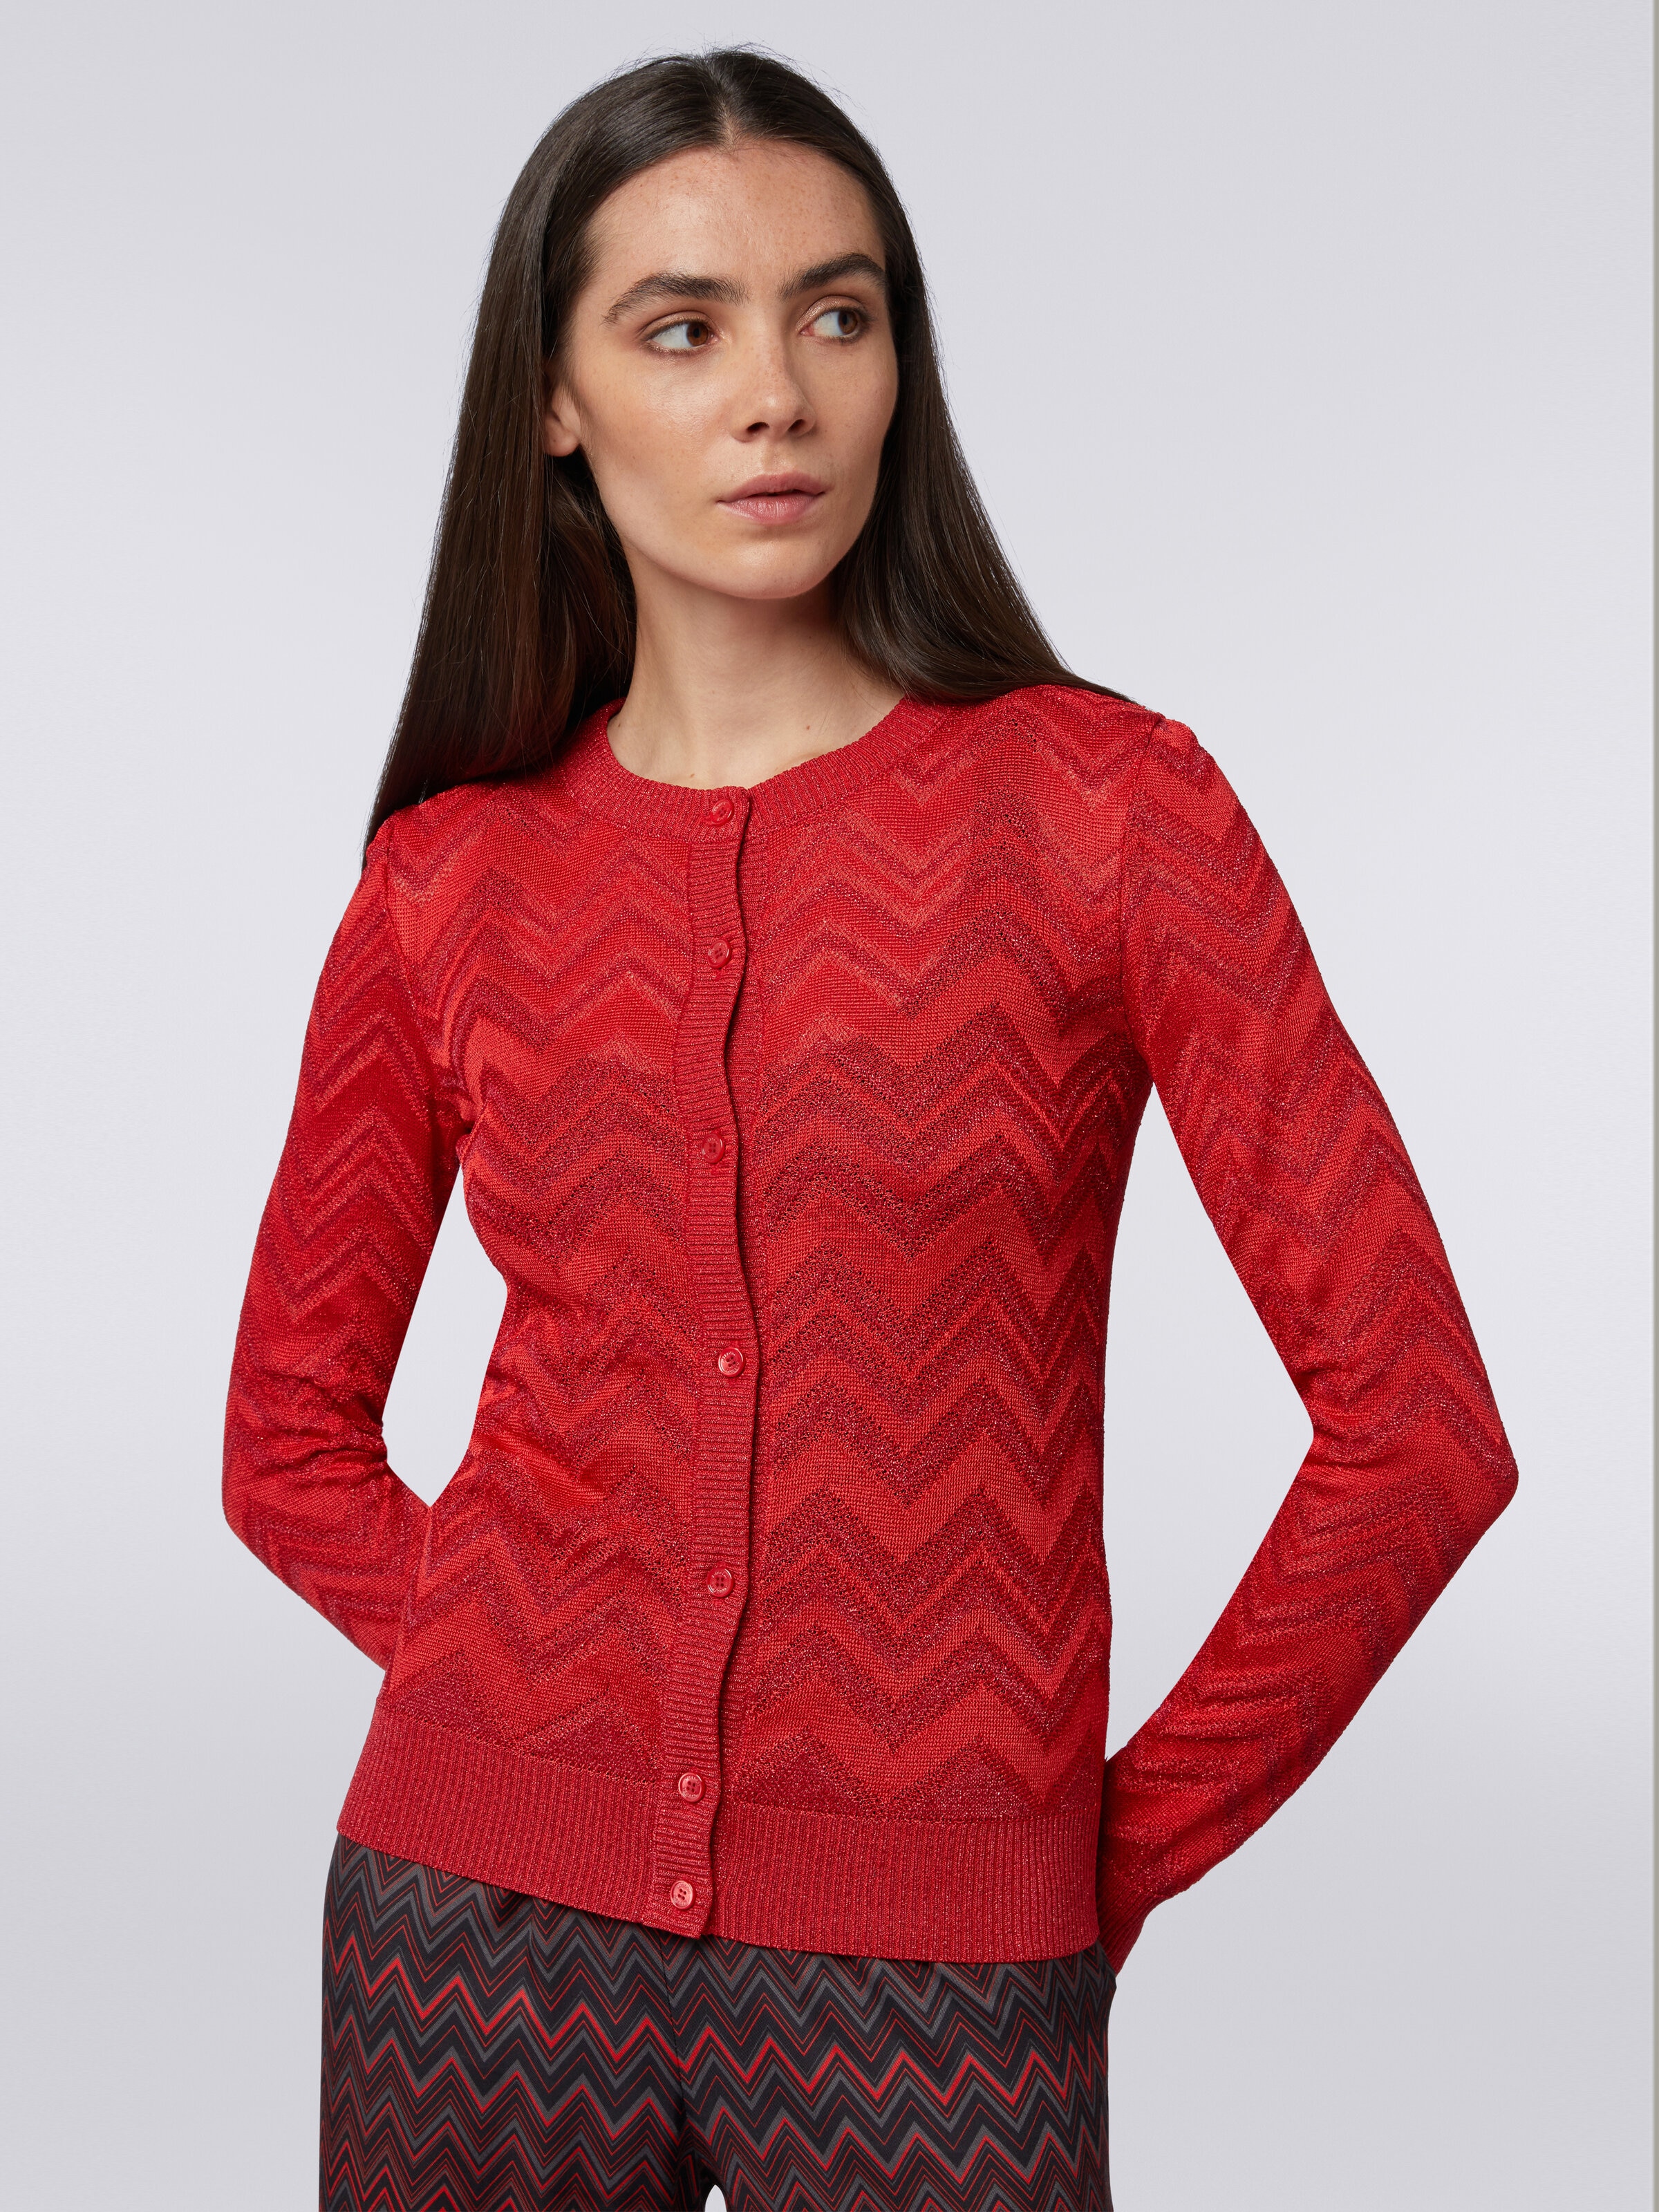 Cardigan in tonal zigzag knit with lurex, Red  - 4